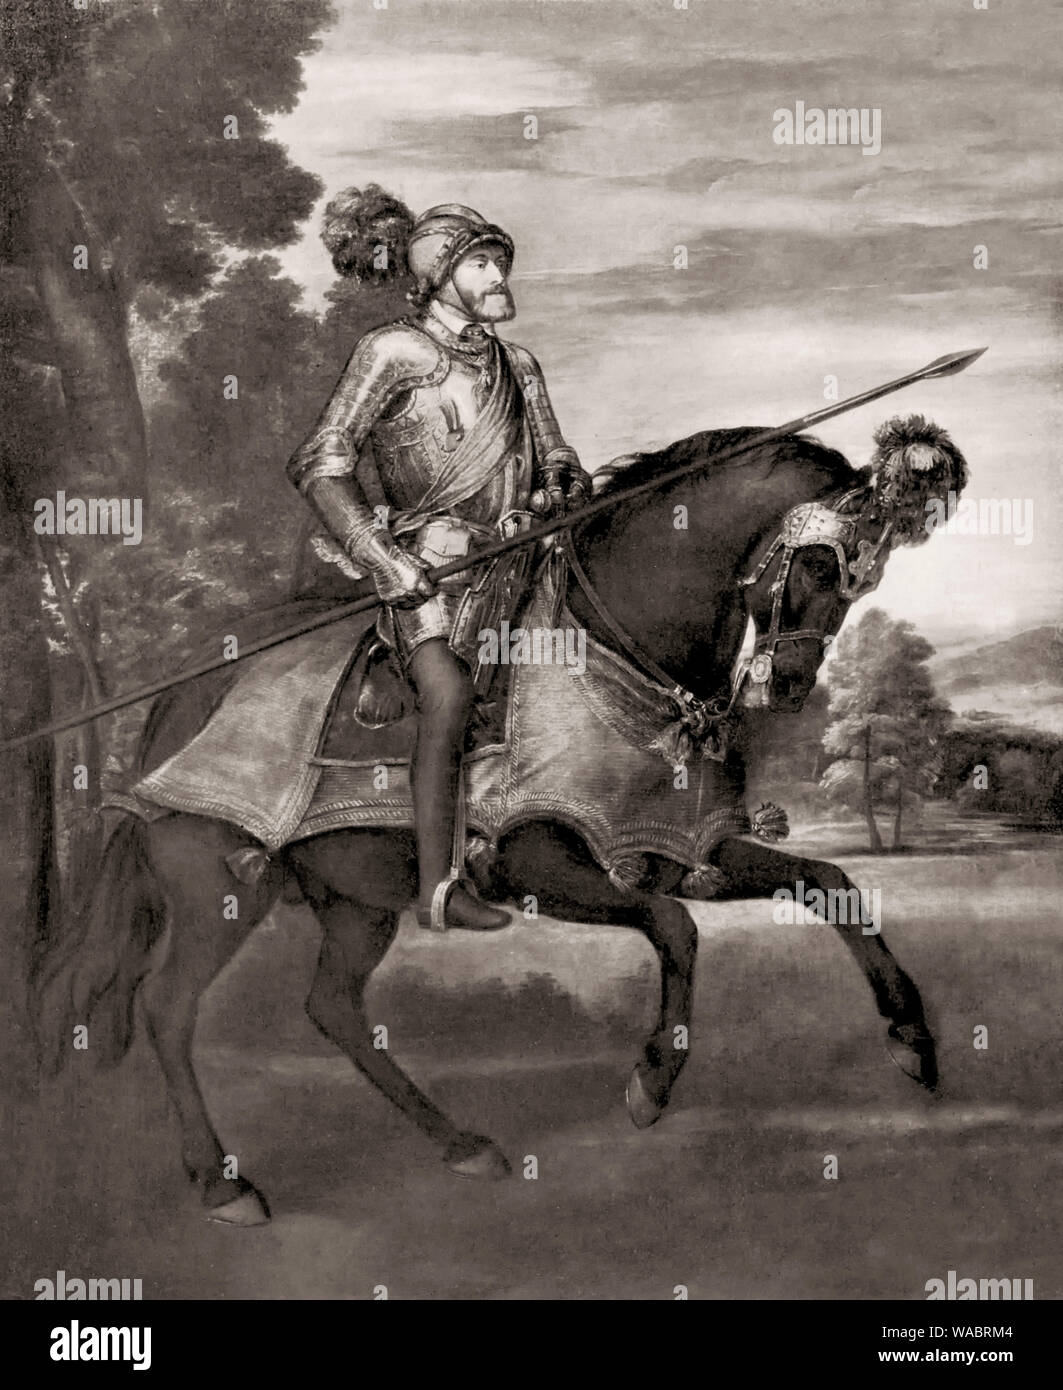 Charles V, 1500 - 1558, Emperor of the Holy Roman Empire, at the Battle of Mühlberg, 1547 Stock Photo